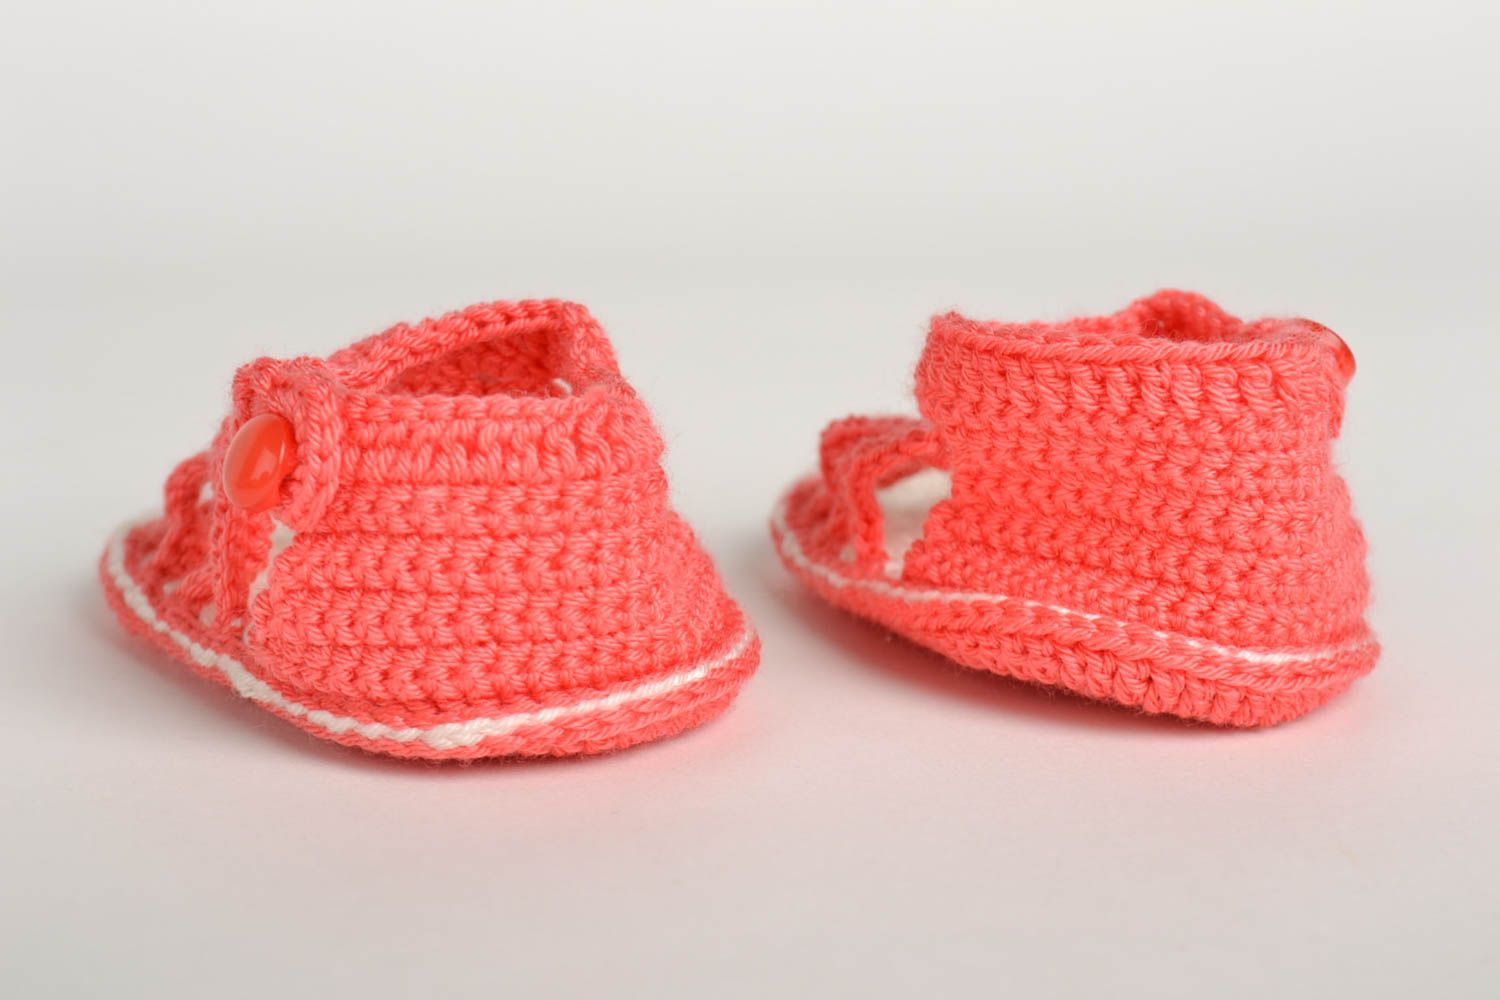 Handmade crocheted baby bootees unusual cute warn sandals lovely kids shoes photo 4